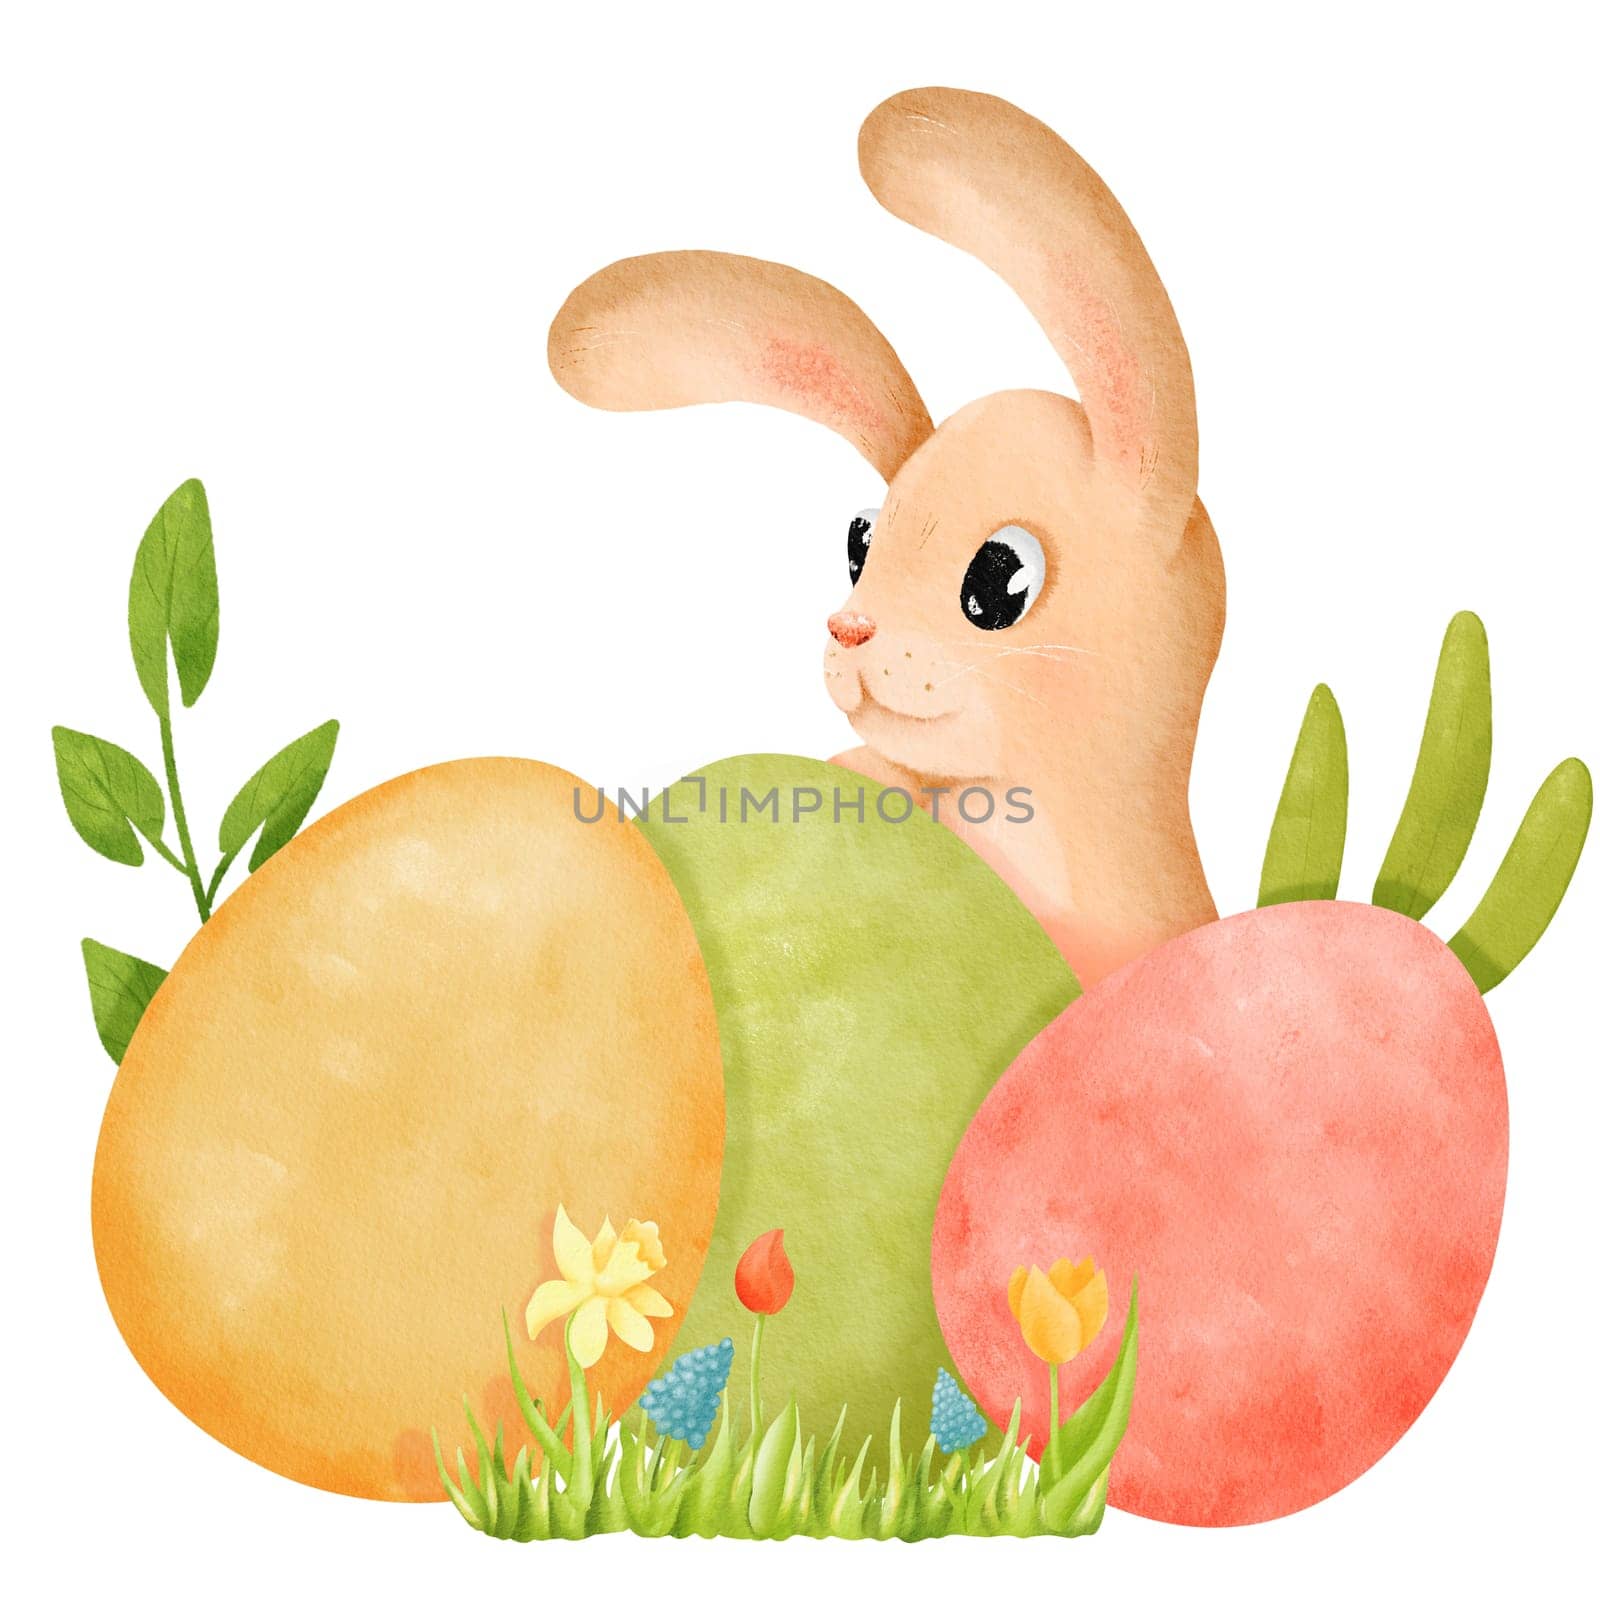 watercolor Easter composition. a charming bunny, vibrant dyed eggs, lush grass, and blossoming spring flowers. for creating festive Easter-themed designs, invitations, and joyful illustrations.